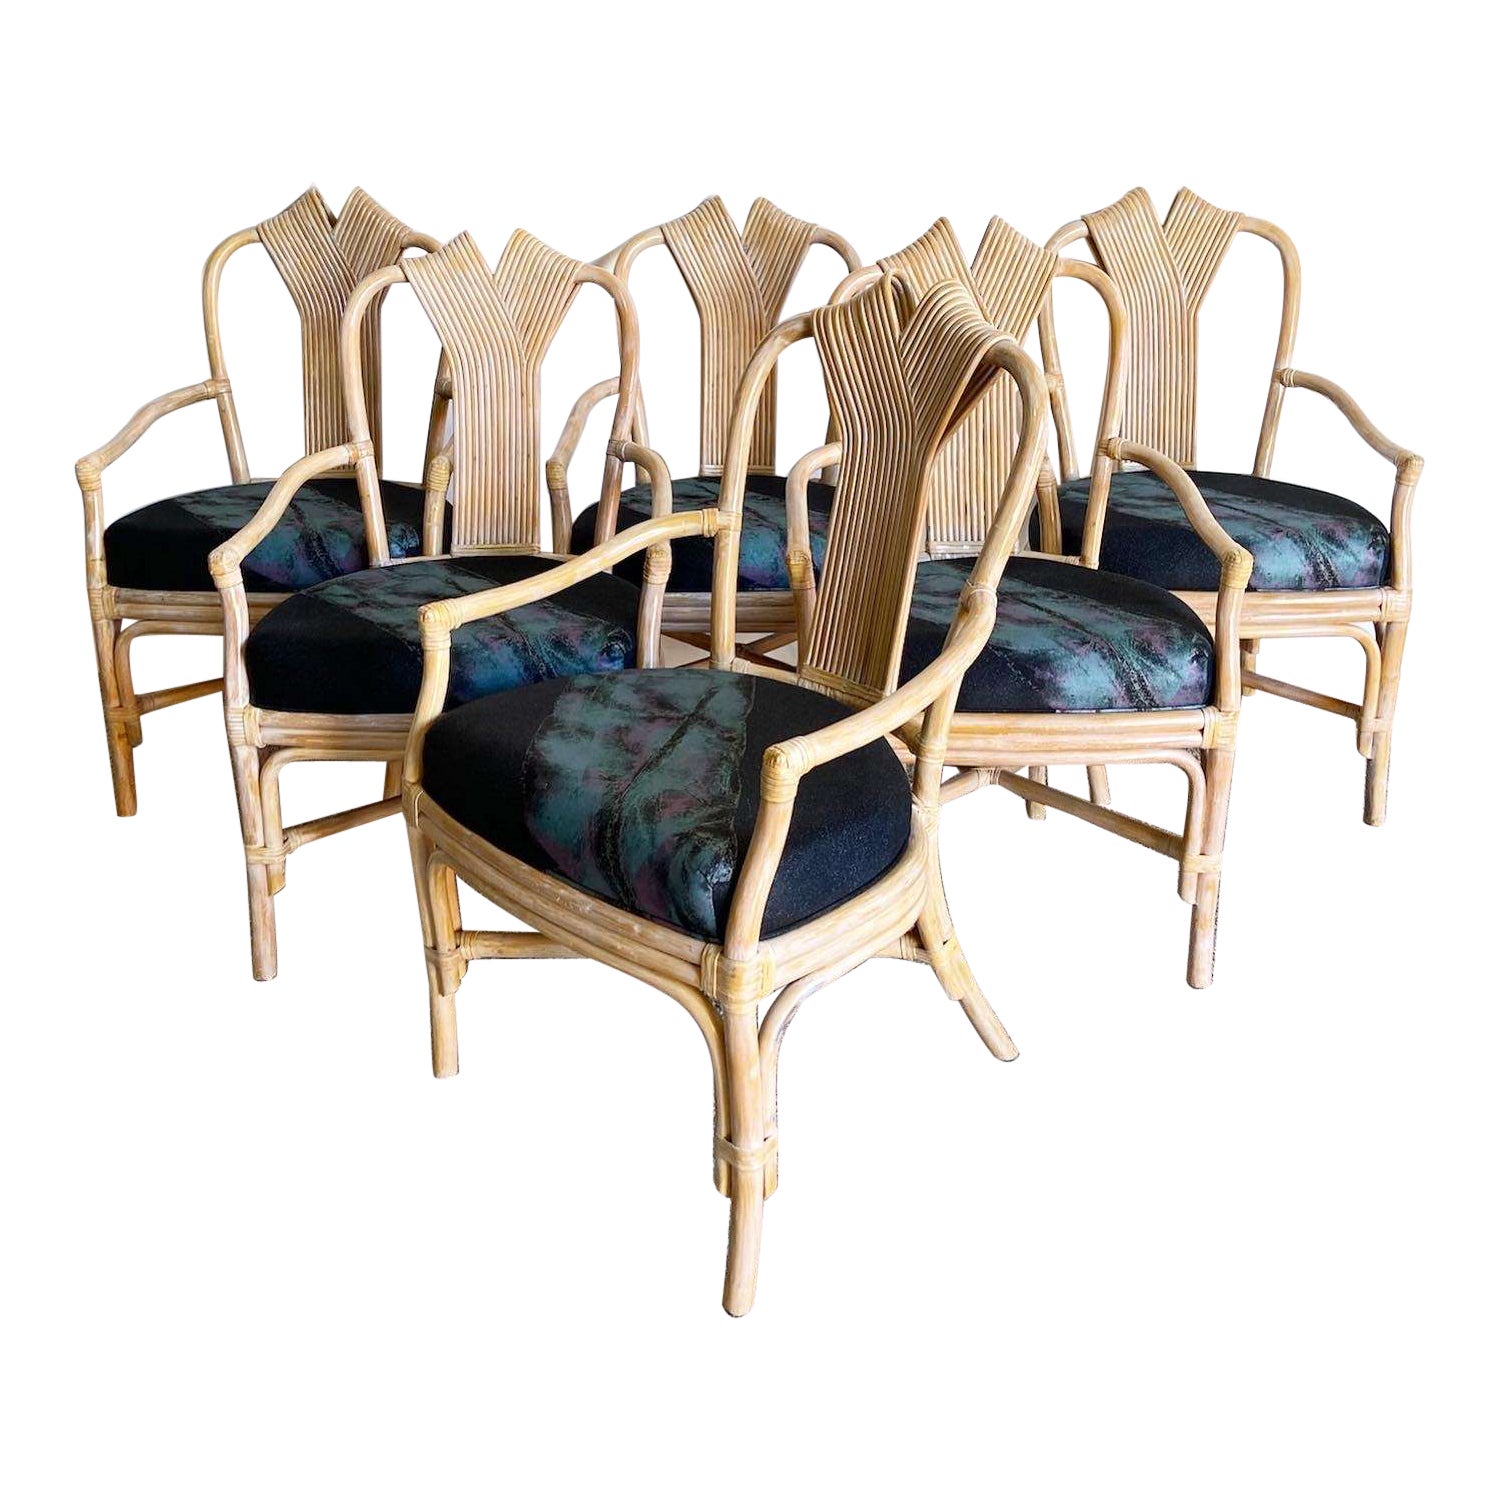 Boho Chic Bamboo Rattan and Reed Dining Chairs - Set of 6 For Sale